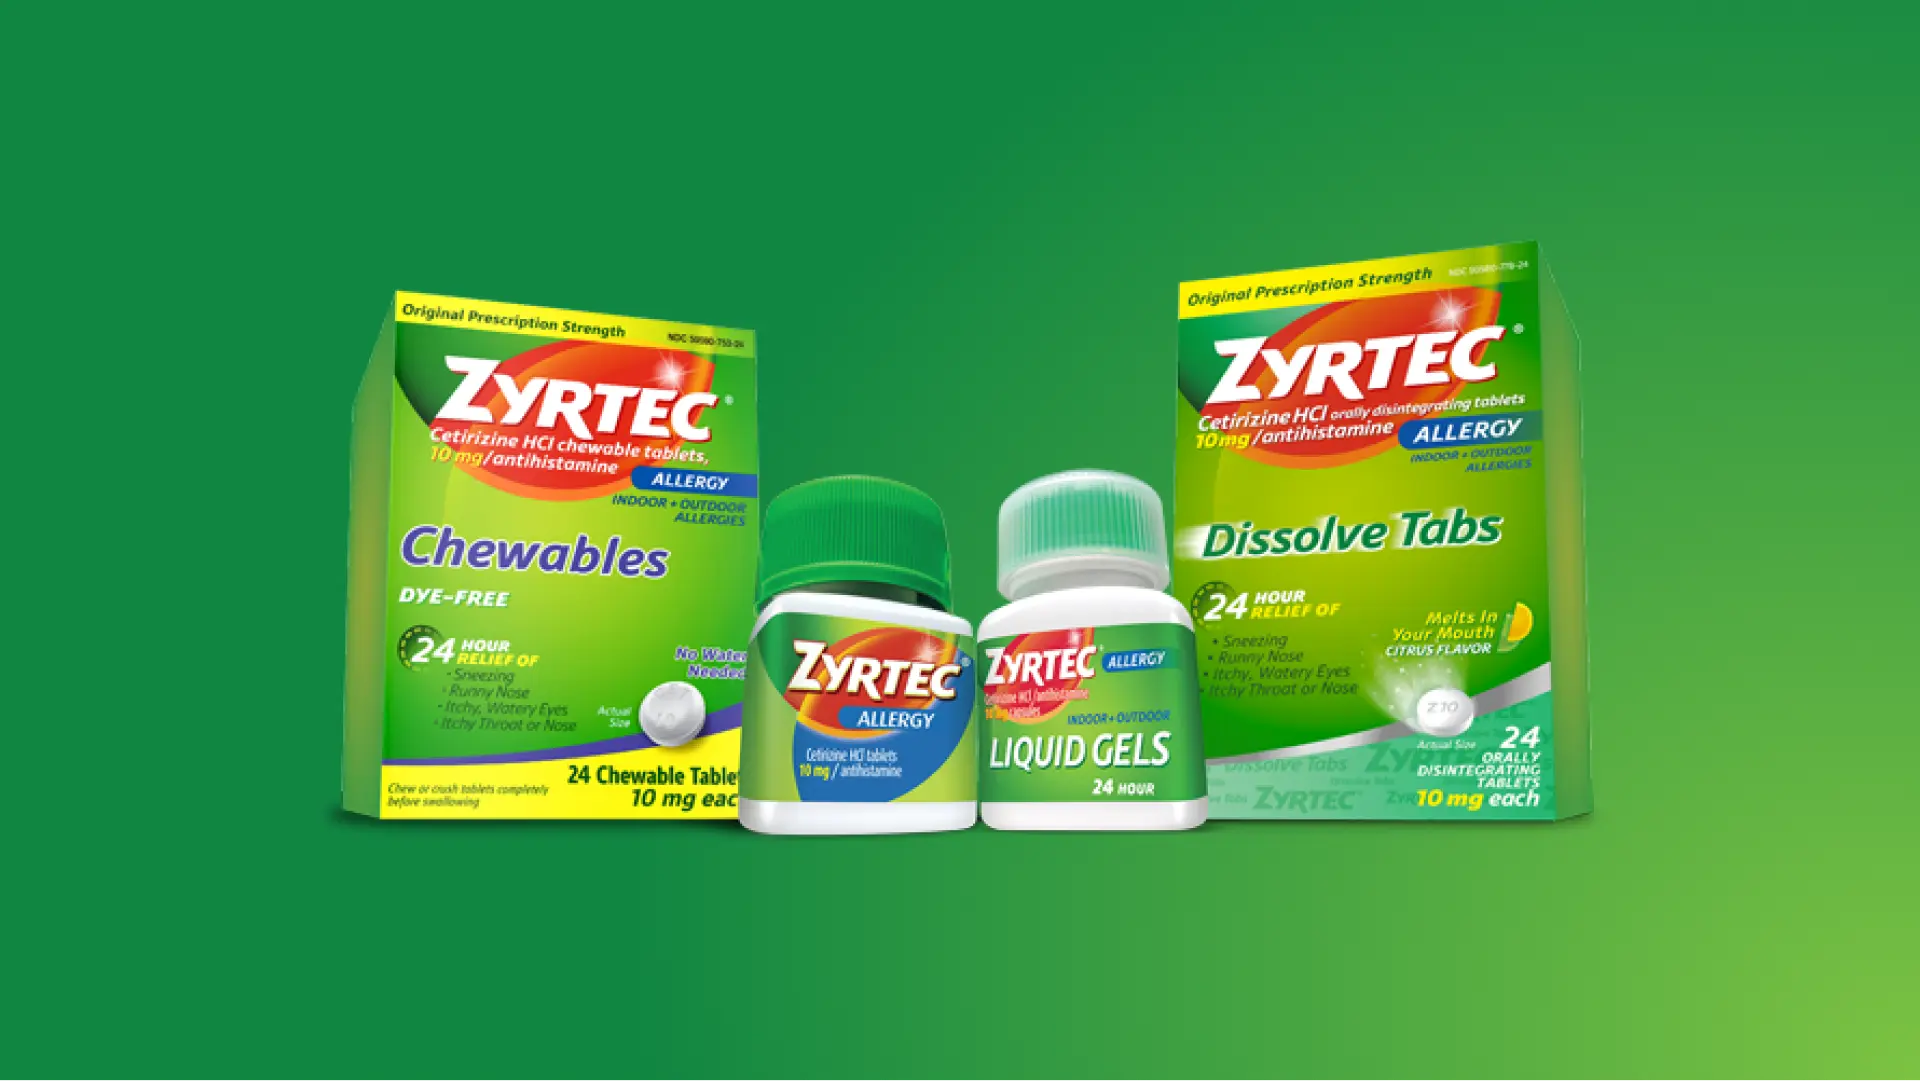 ZYRTEC® for Adult and Children's Cetirizine HCl Products